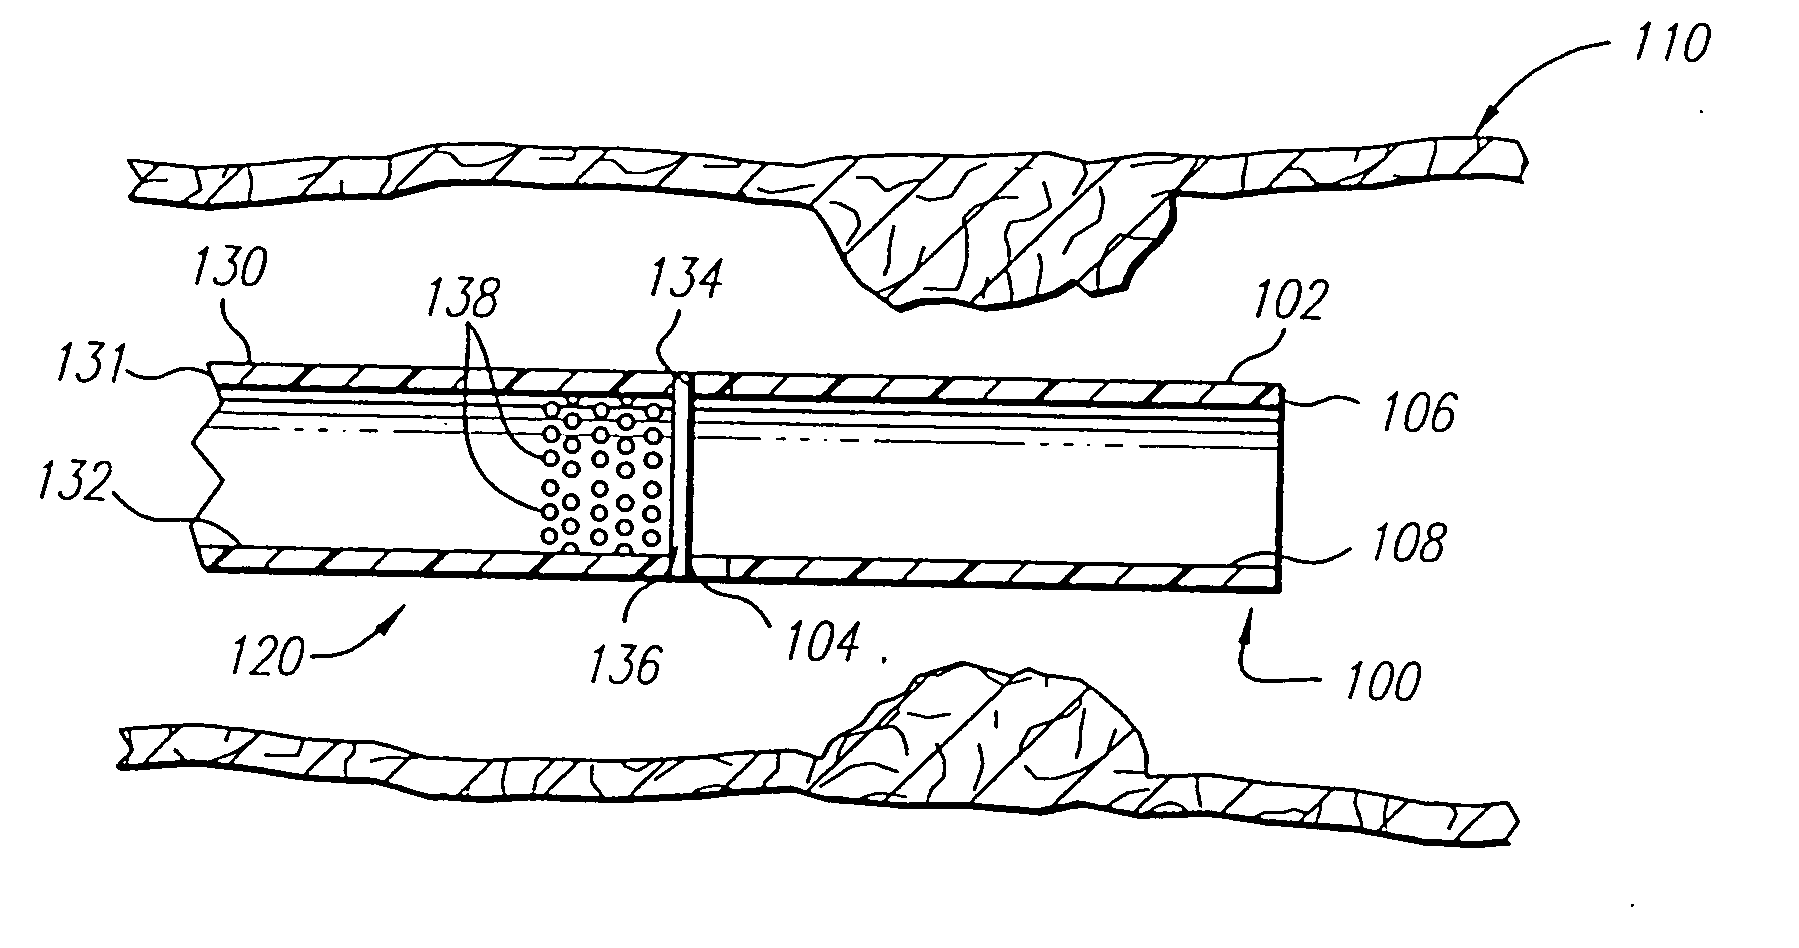 Stent delivery catheter and method of use